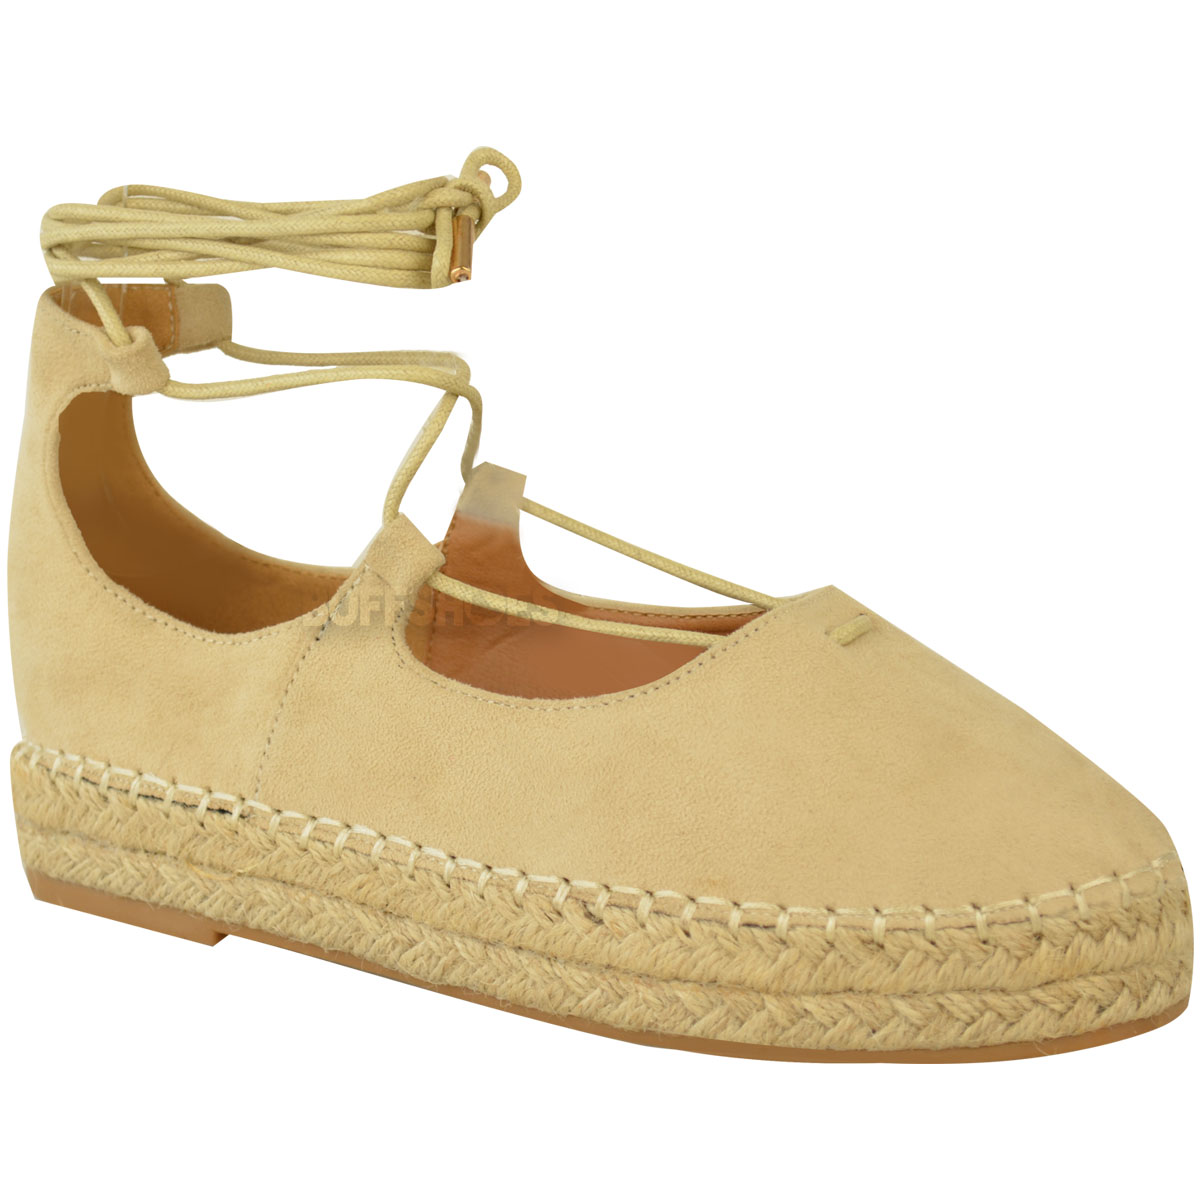 New Womens Ladies Lace Up Strappy Low Flat Canvas Wedge Espadrilles ...